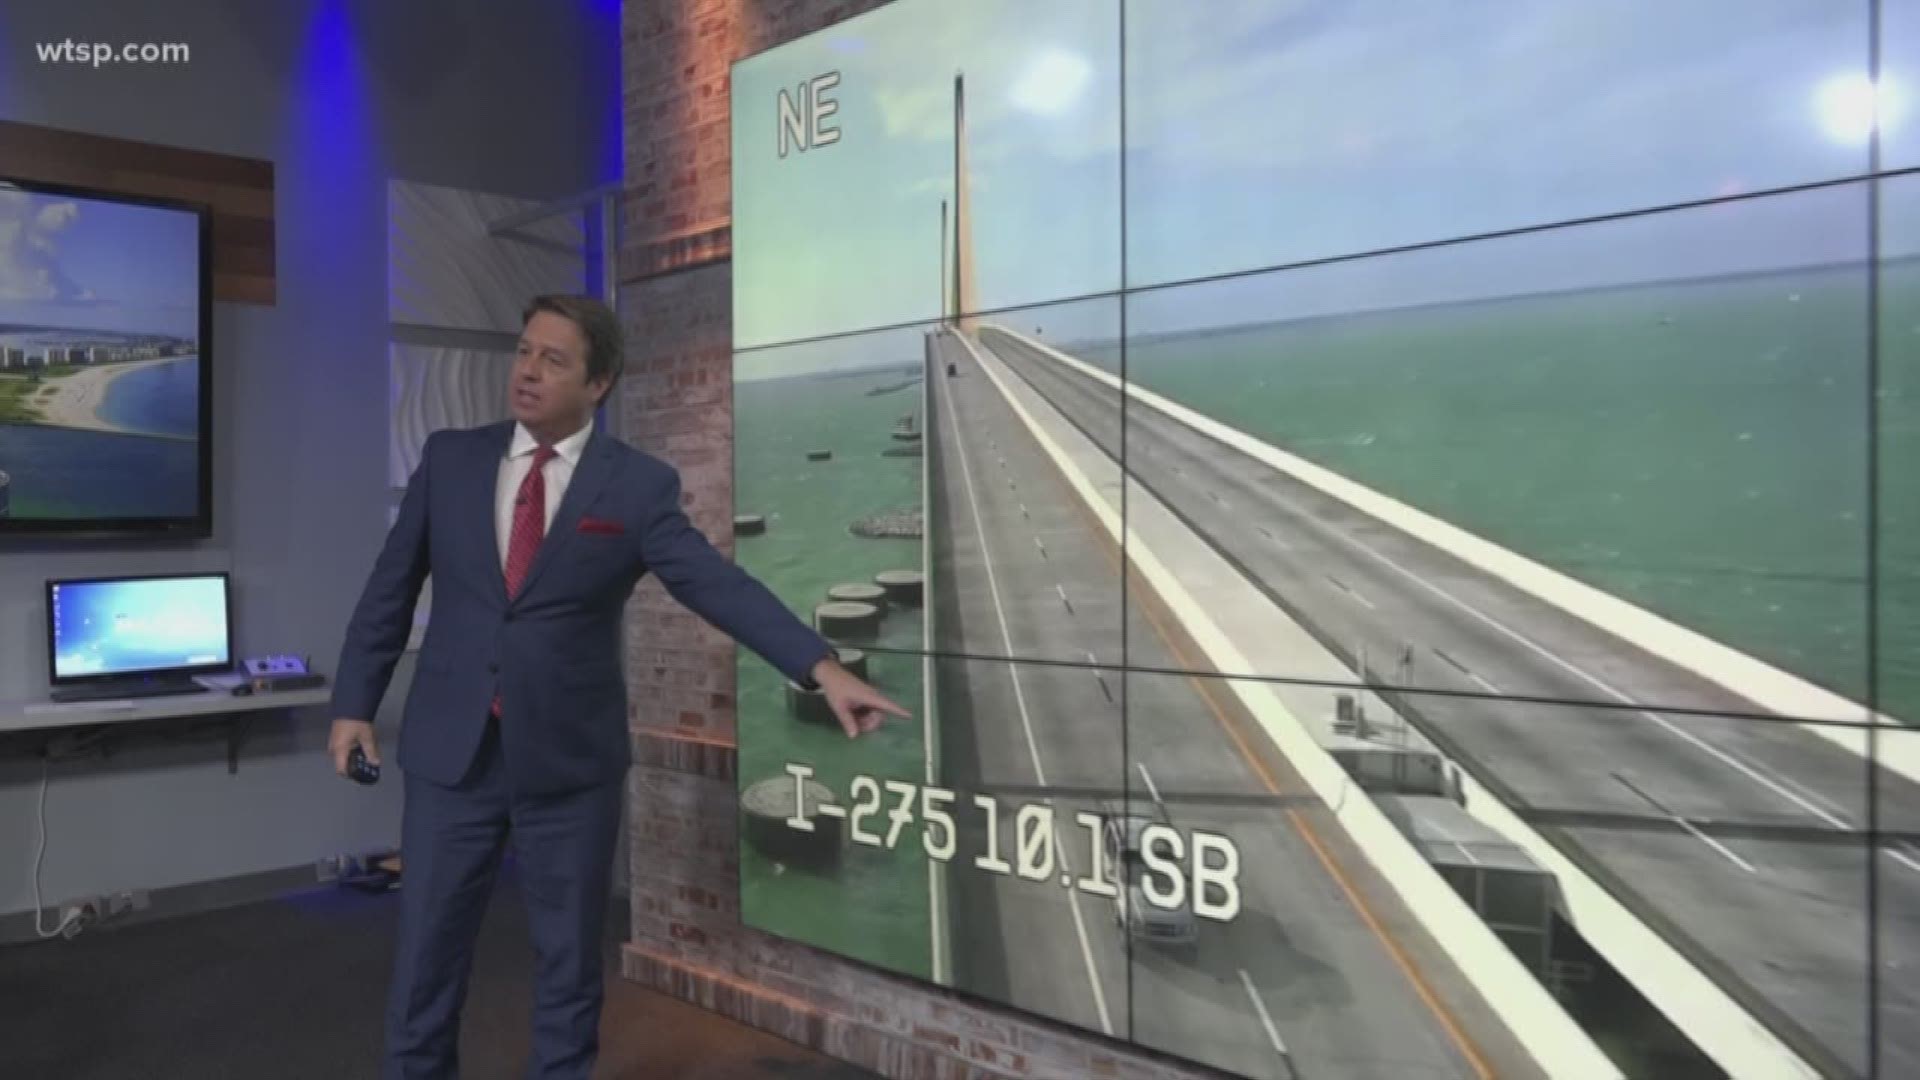 The Sunshine Skyway Bridge has reopened following powerful winds and a strong line of storms rolling through Tampa Bay. 

The Florida Highway Patrol had said it would close the bridge connecting Pinellas and Manatee counties if sustained winds reached at least 40 miles per hour.